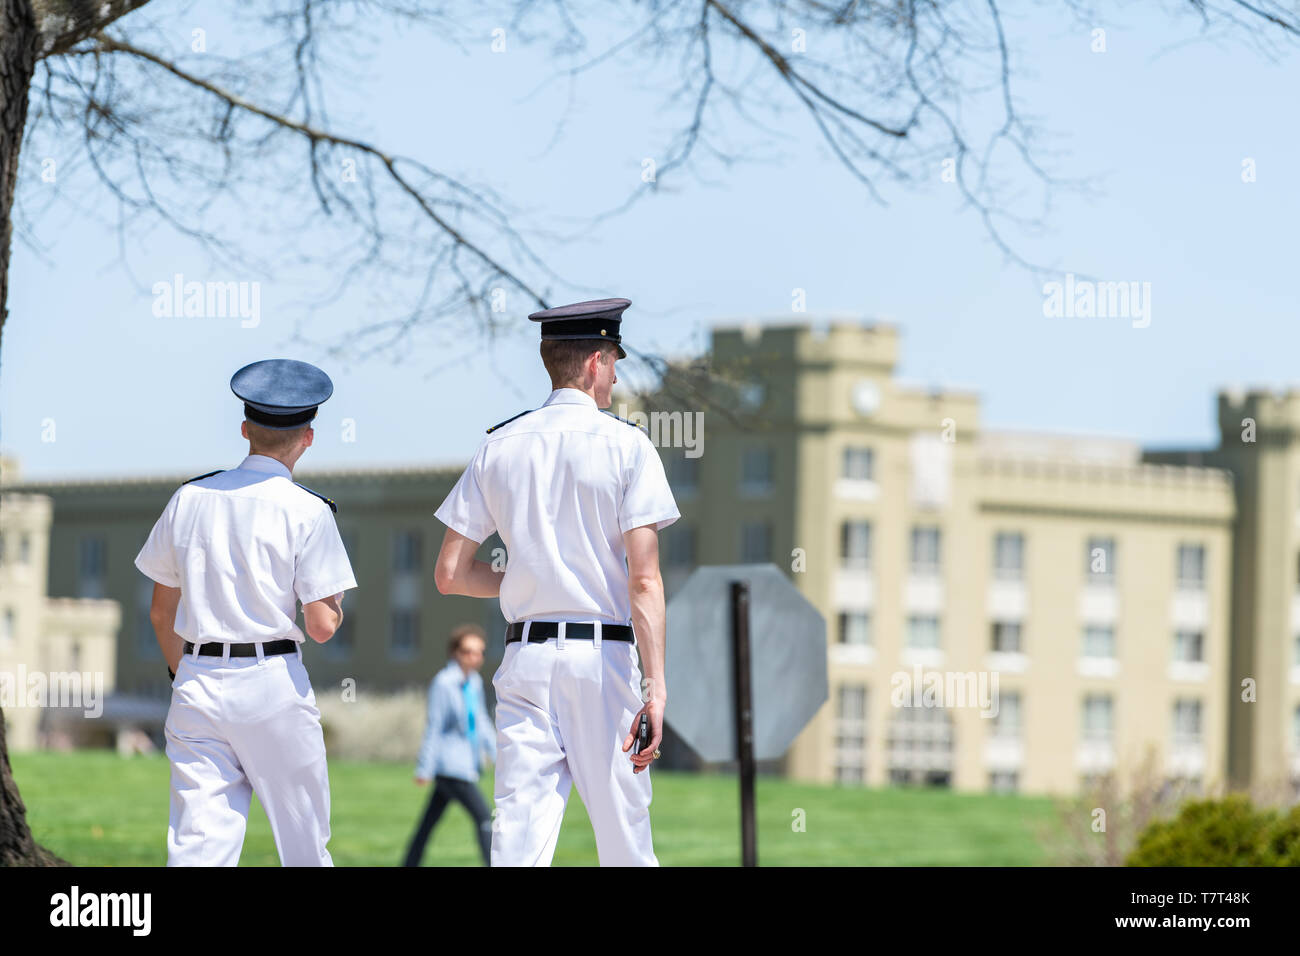 Lexington, USA - April 18, 2018: Men male cadets students in white uniforms walking at Virginia Military Institute main campus grounds near Clayton Ha Stock Photo